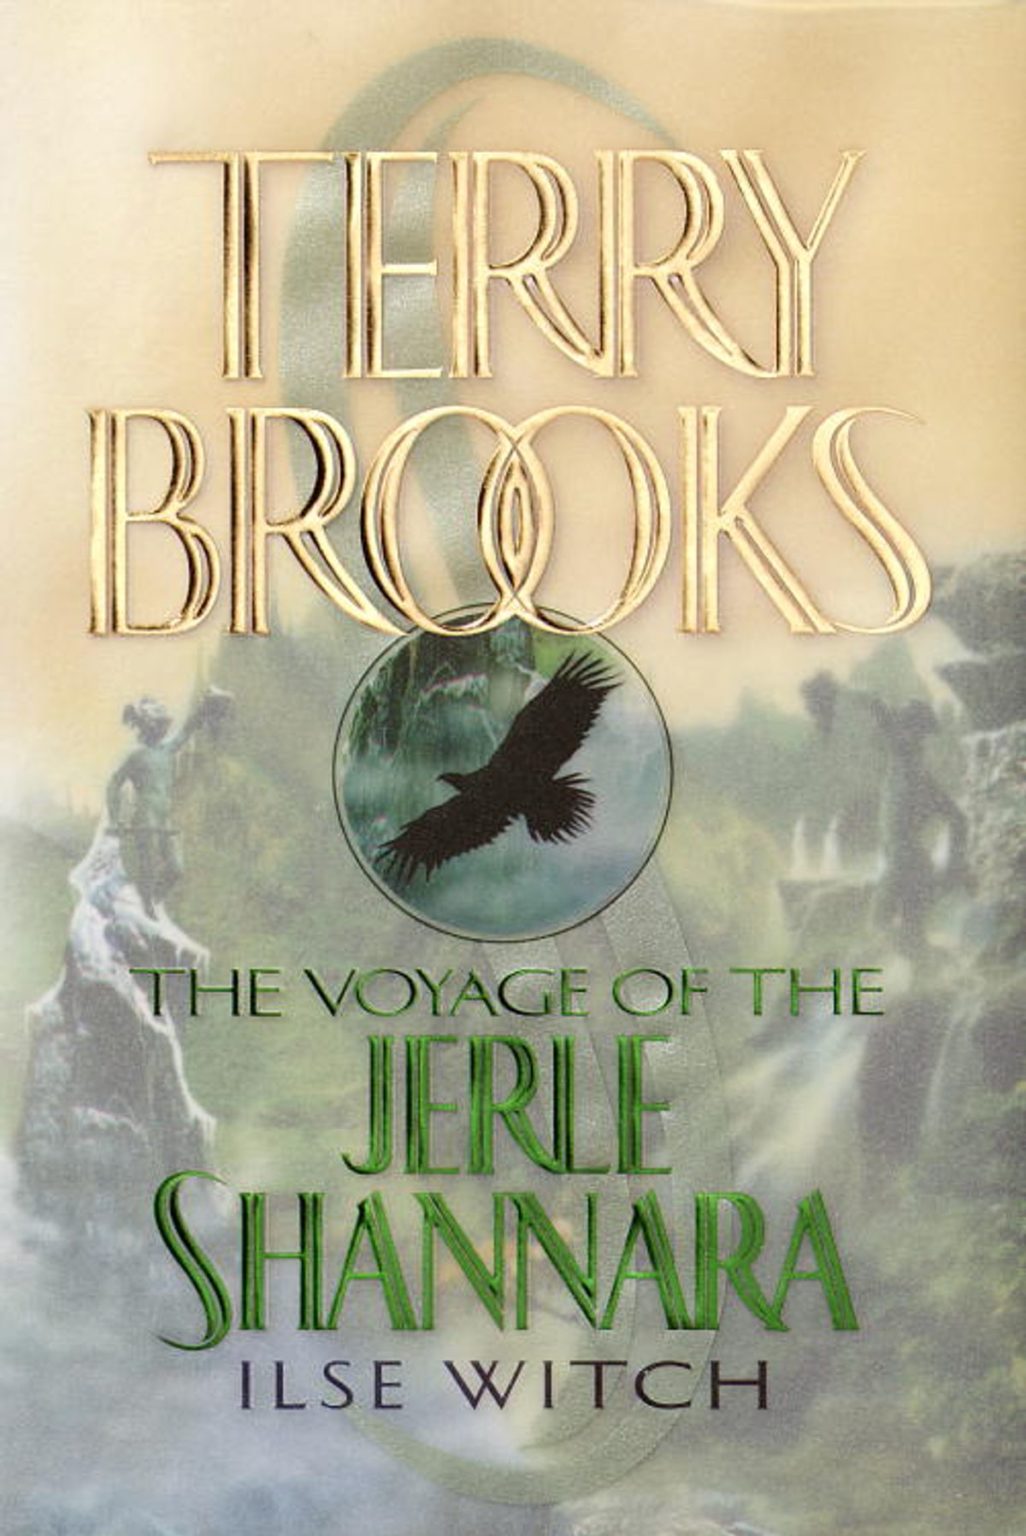 download terry brooks the voyage of the jerle shannara trilogy